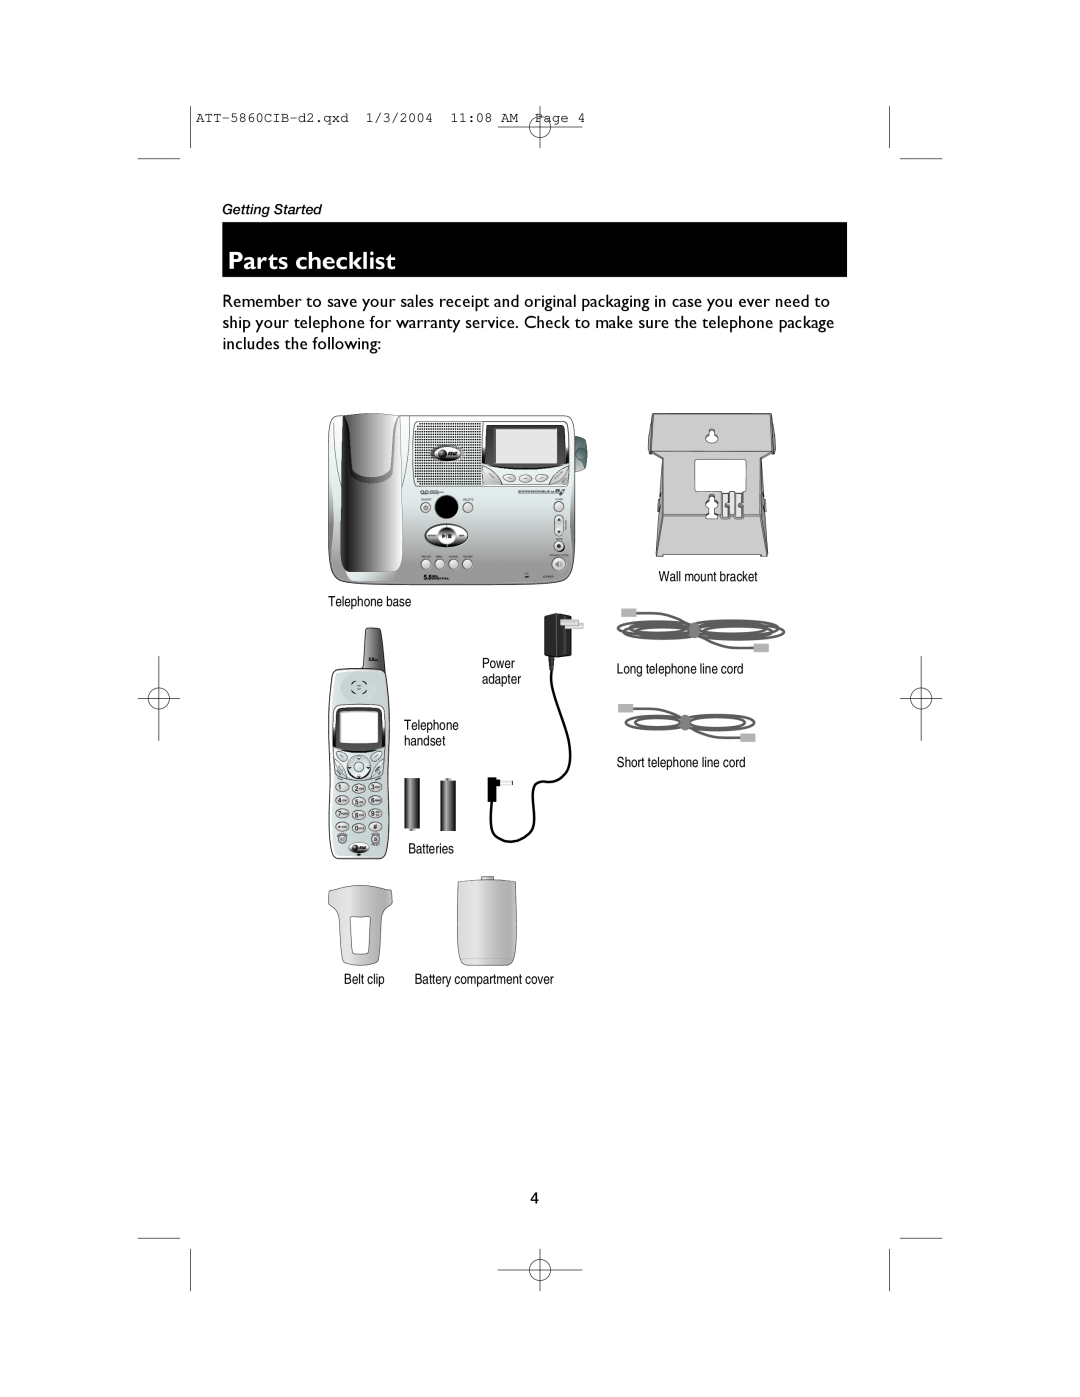 AT&T E5860 Parts checklist, ATT-5860CIB-d2.qxd 1/3/2004 1108 AM Page, Getting Started, Wall mount bracket Telephone base 